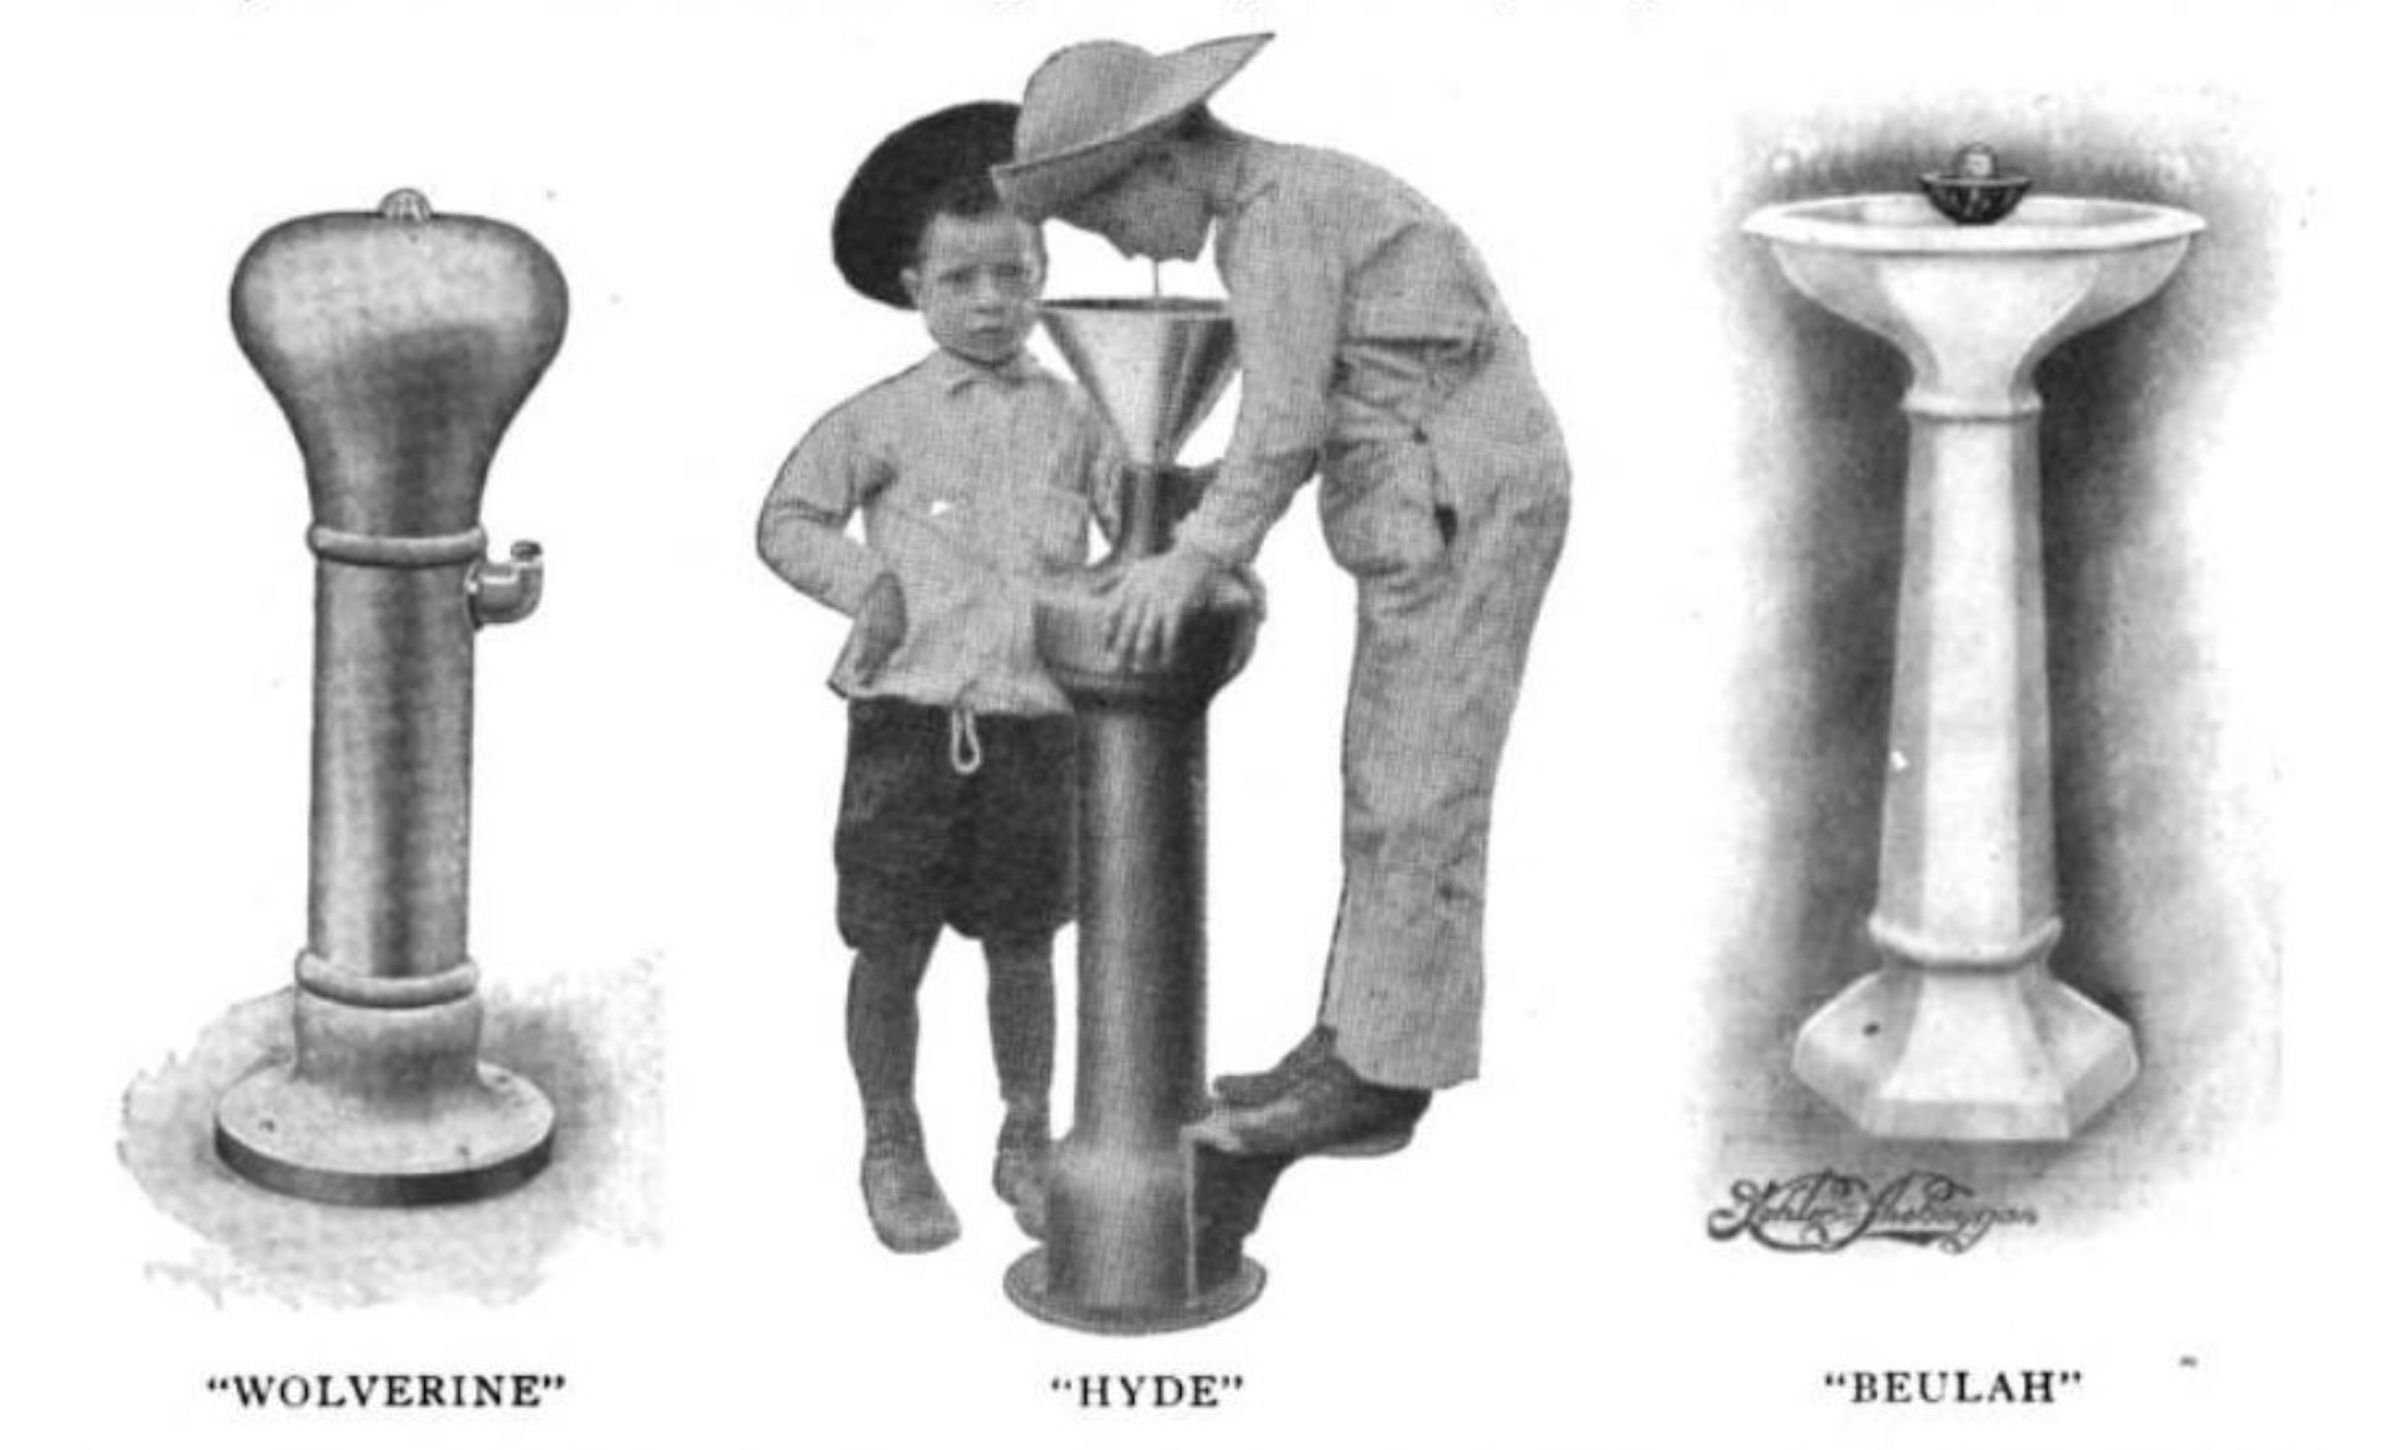 “Sanitary fountains” were popularized in the early 1900s to prevent the spread of disease; earlier types had a “common cup” everyone would share. Modifications came fast after scientists found vertical streams and a spout that fits inside one’s mouth weren’t best for public health, either. 